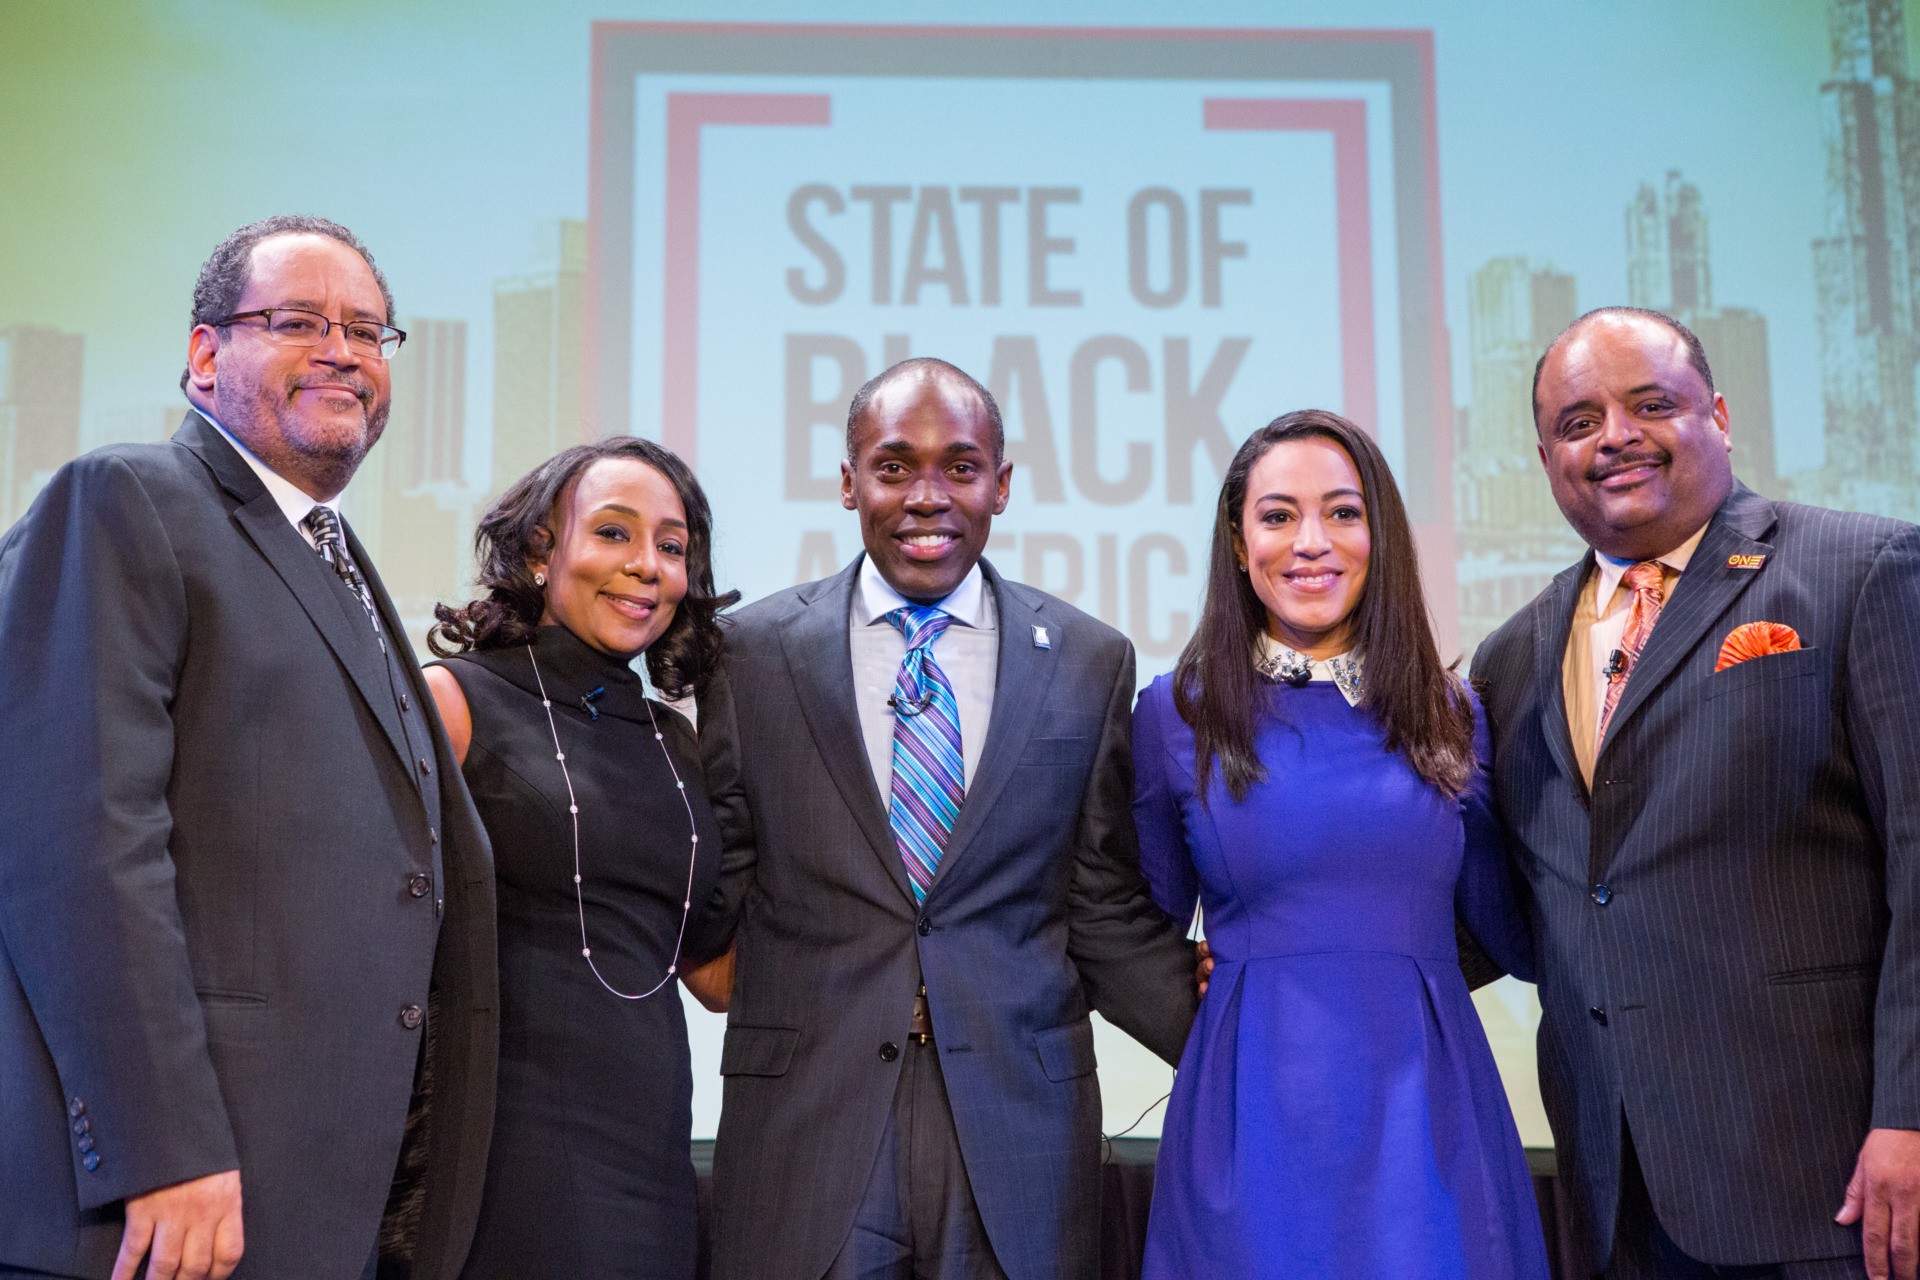 IMAGE DISTRIBUTED FOR TV ONE - Left to right, panelists Dr. Michael Eric Dyson, Georgetown University professor and author, Angela Sailor, former director of the Coalition Department at the RNC, Paris Dennard, political commentator, Angela Rye, political commentator and analyst, and moderator Roland Martin, Managing Editor and Host of NewsOne Now, stand onstage at The State of Black America Town Hall taping presented by TV One and the National Urban League at the Howard Theater on Tuesday, May 2, 2017, in Washington, D.C. The two-hour special will premiere Wednesday, May 31 at 8 p.m. ET on TV One. (Allison Shelley/AP Images for TV One)